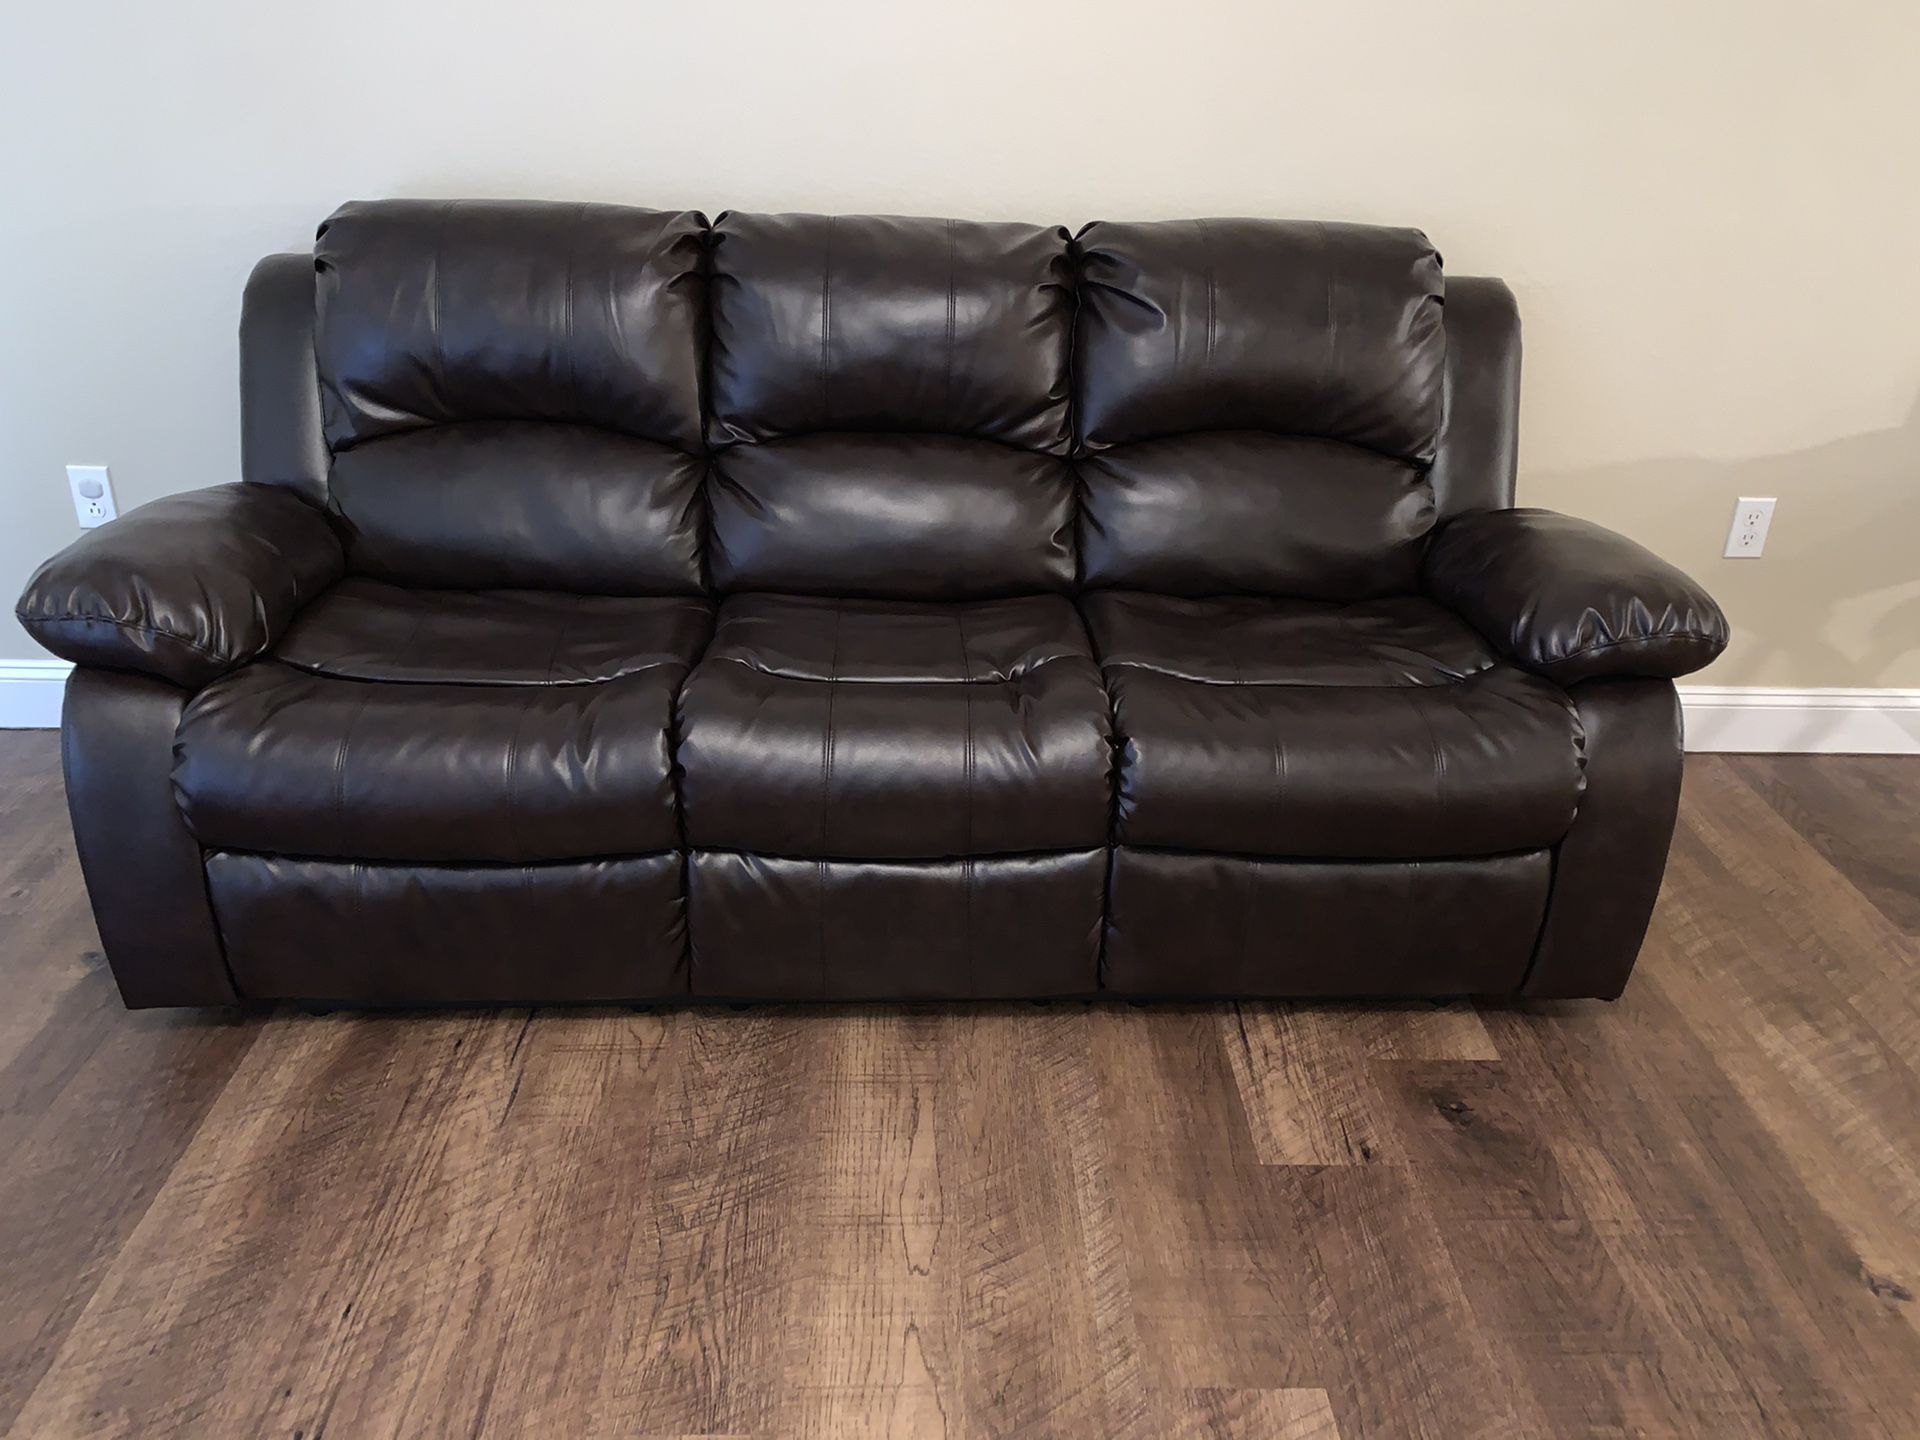 American furniture Espresso brown reclining couch